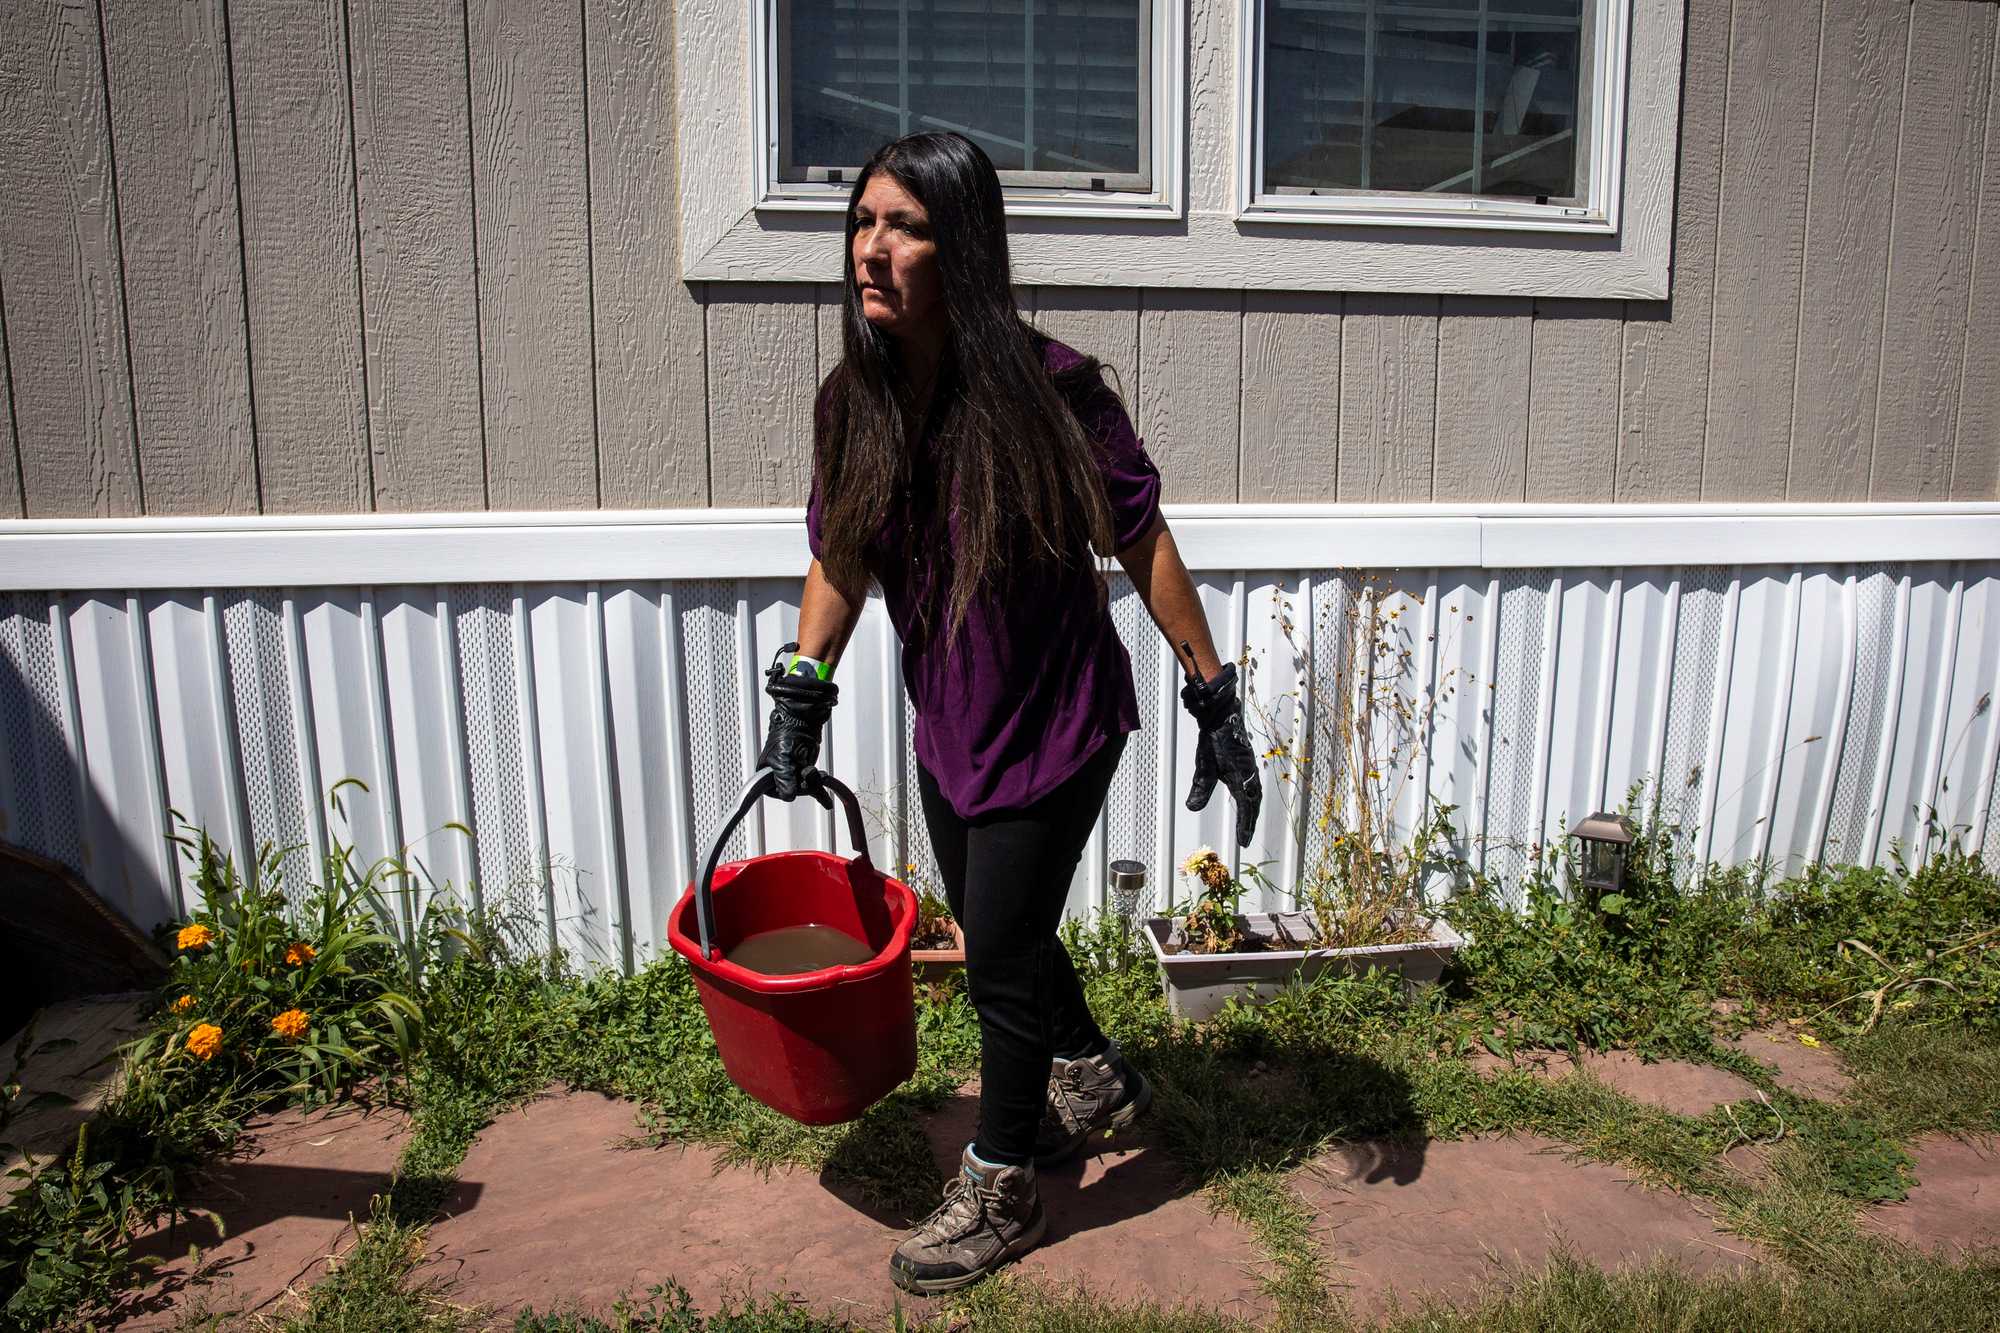 Adelina Paiz-Vaughn waters her garden with buckets that she filled up from the river near her home. Ash and soot from the fire poisoned the local water supply, leaving the area facing further water restrictions.
